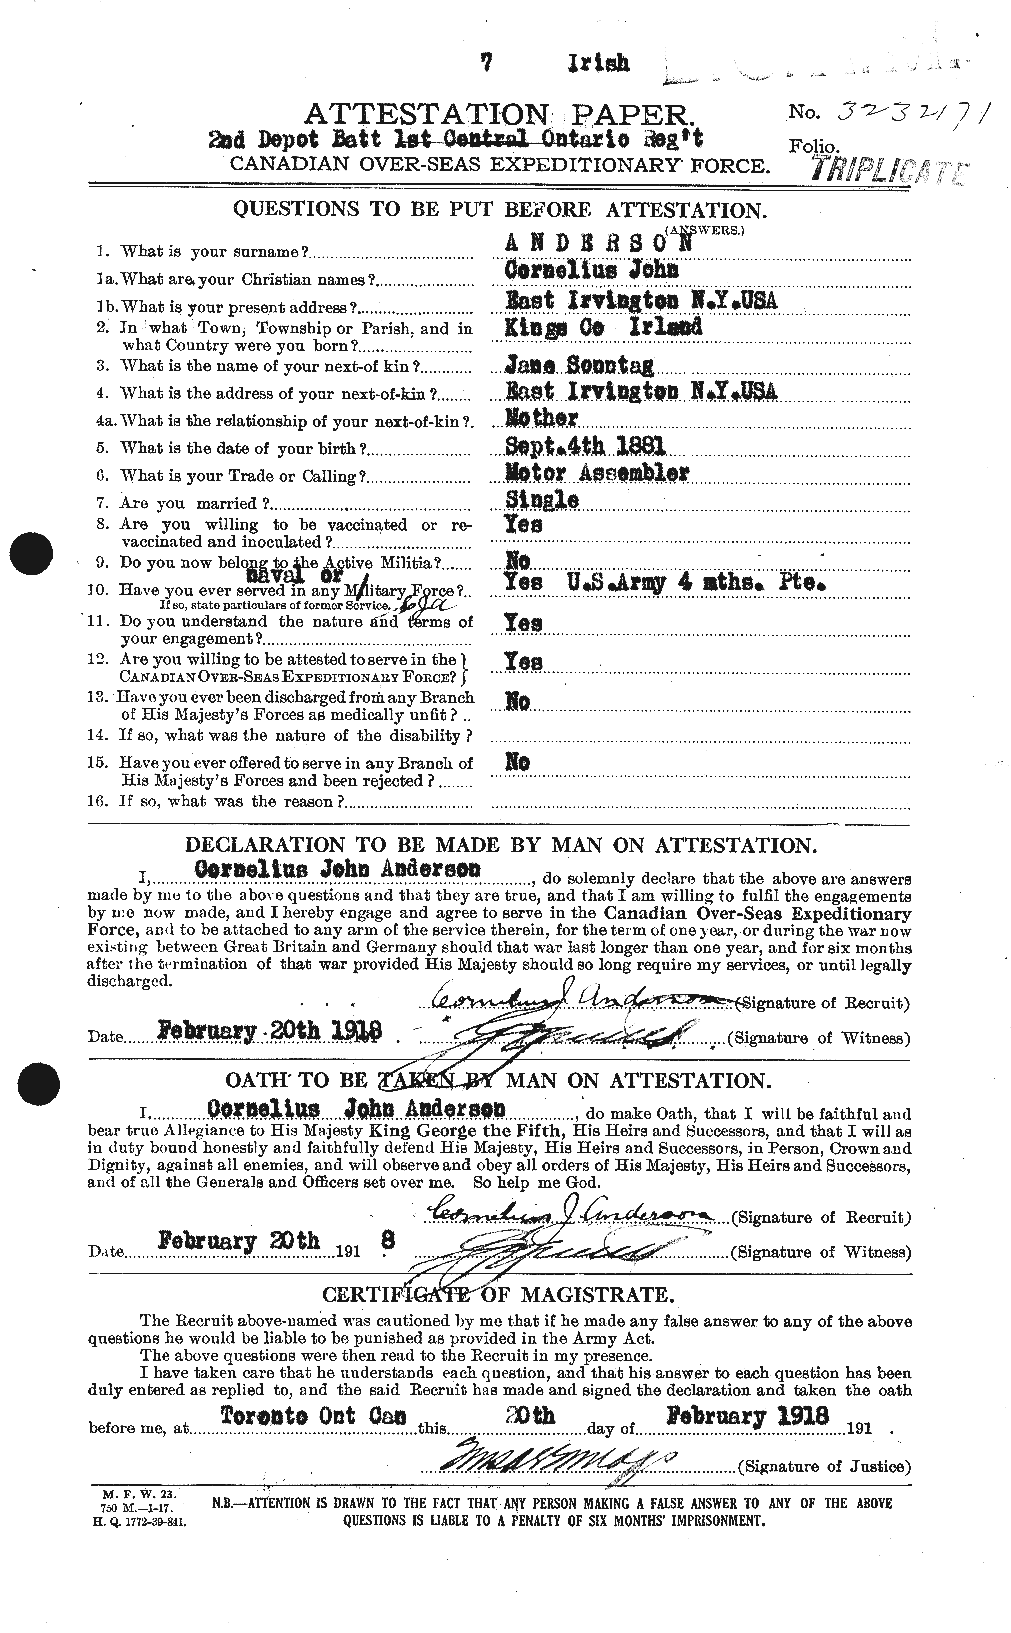 Personnel Records of the First World War - CEF 210052a